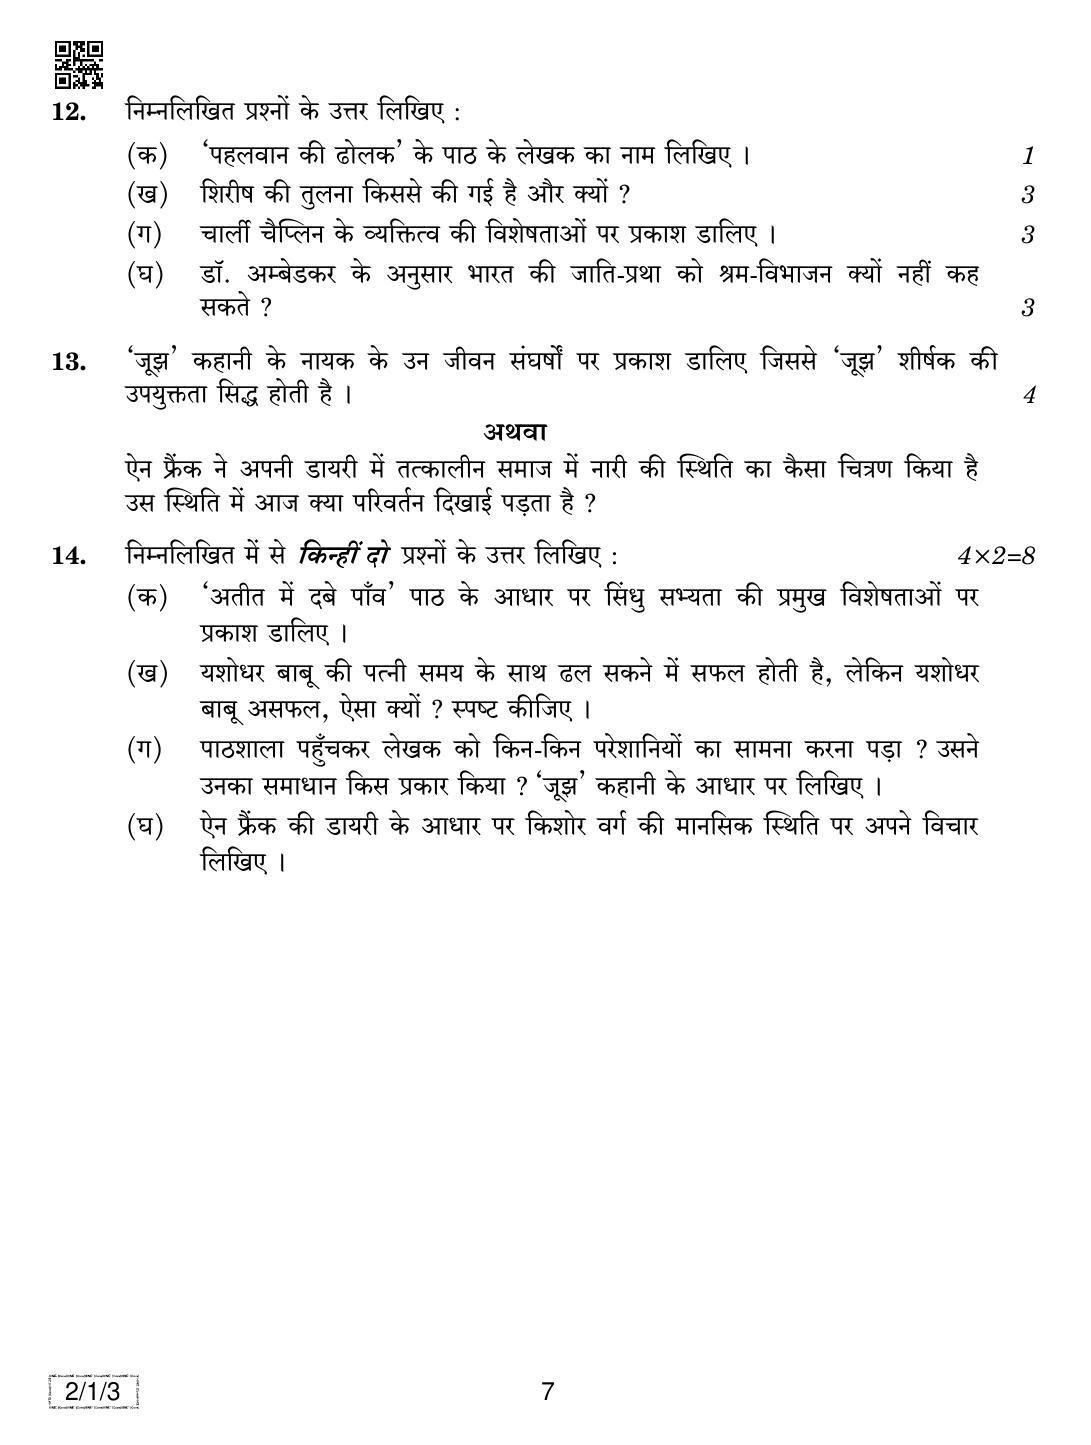 CBSE Class 12 2-1-3 HINDI CORE 2019 Compartment Question Paper - Page 7